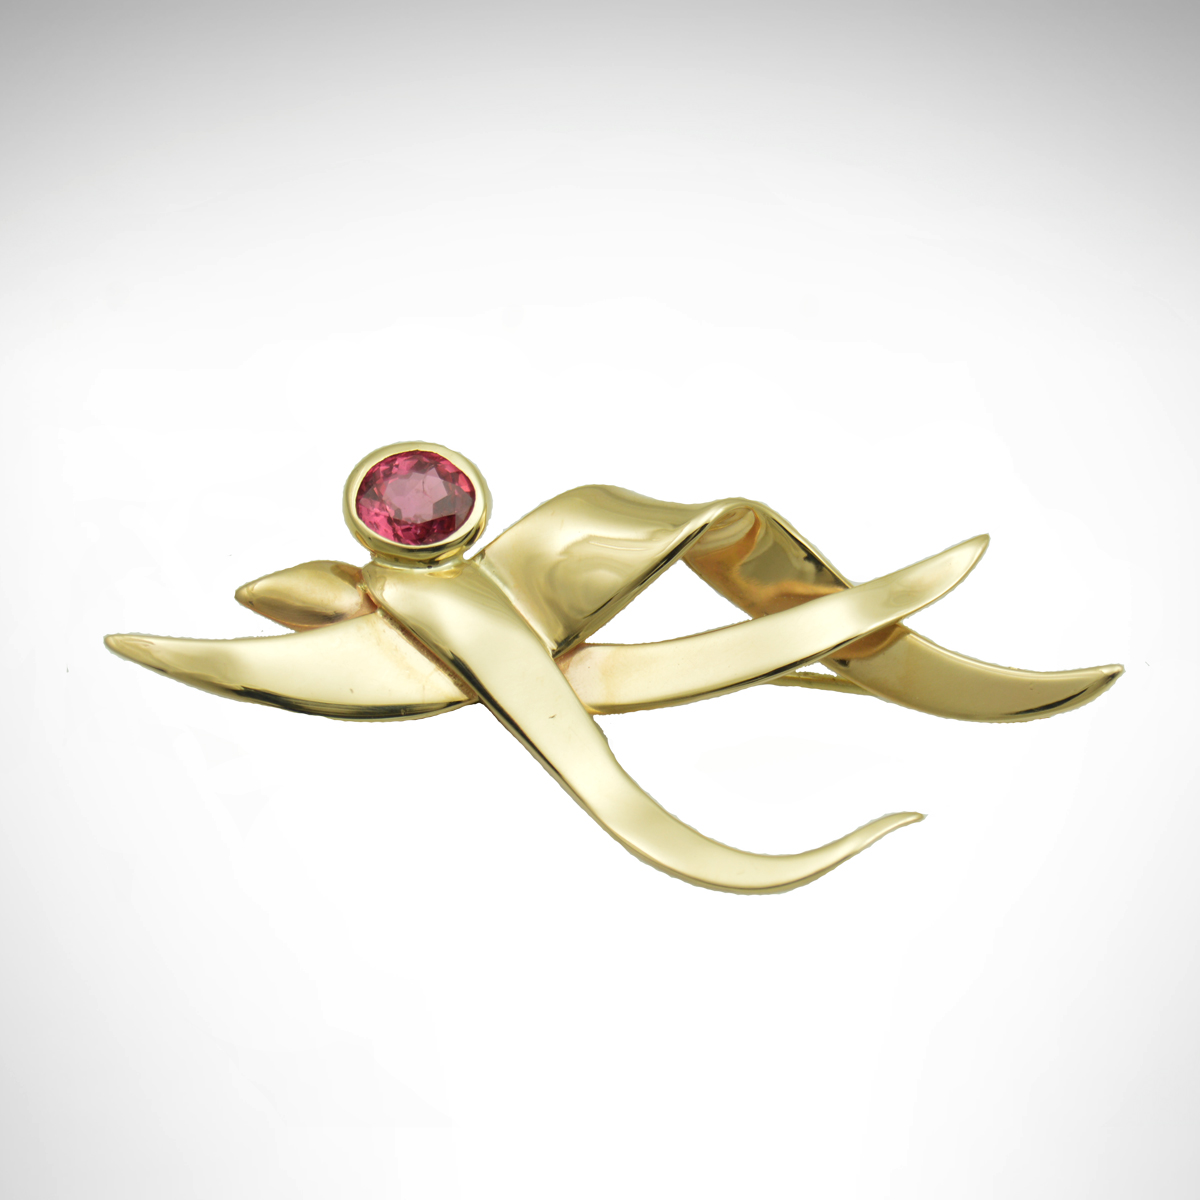 14k yellow gold brooch with dark pink oval sapphire in bezel, pin with wave-like design, custom design